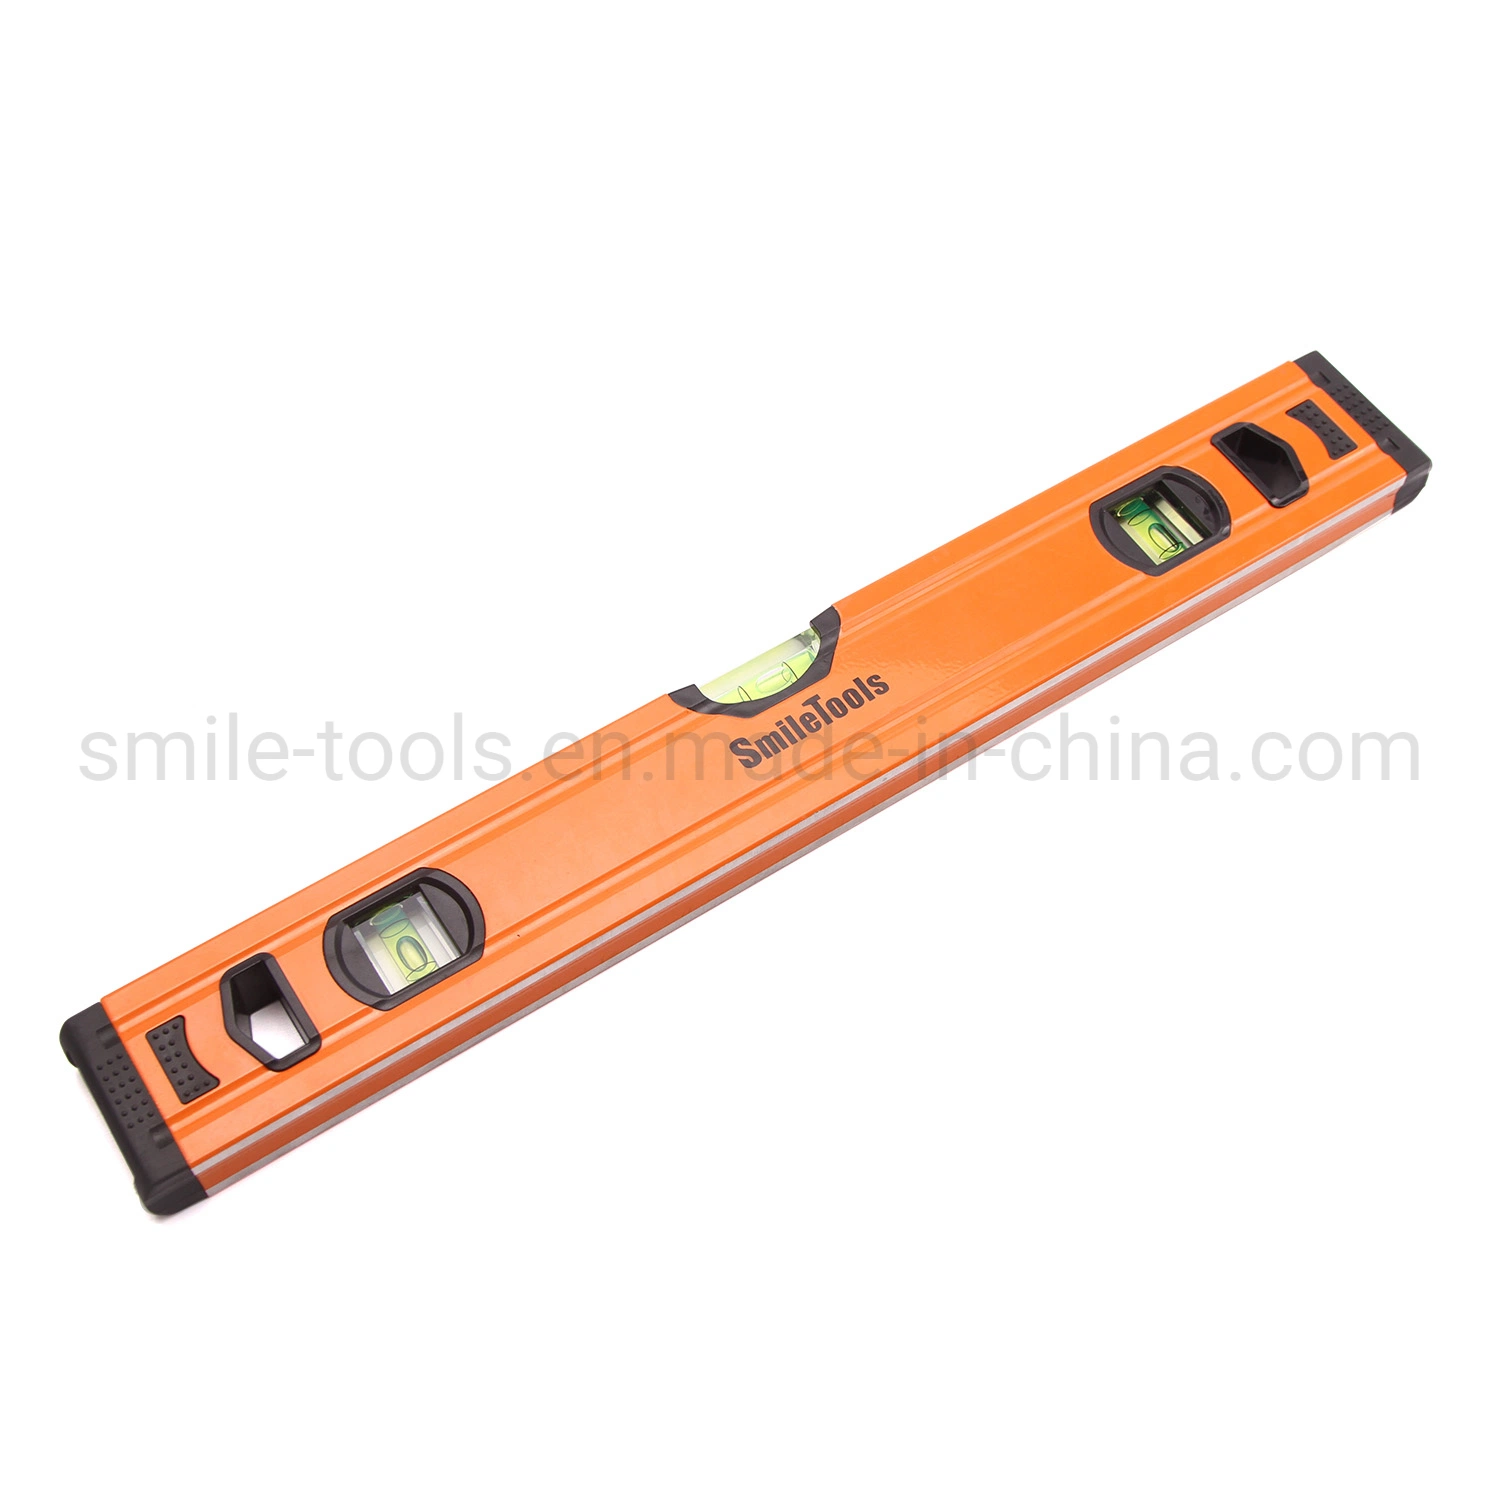 Aluminum Alloy Spirit Level 400mm Bubble Ruler High Precision with Overhead Viewing Slot